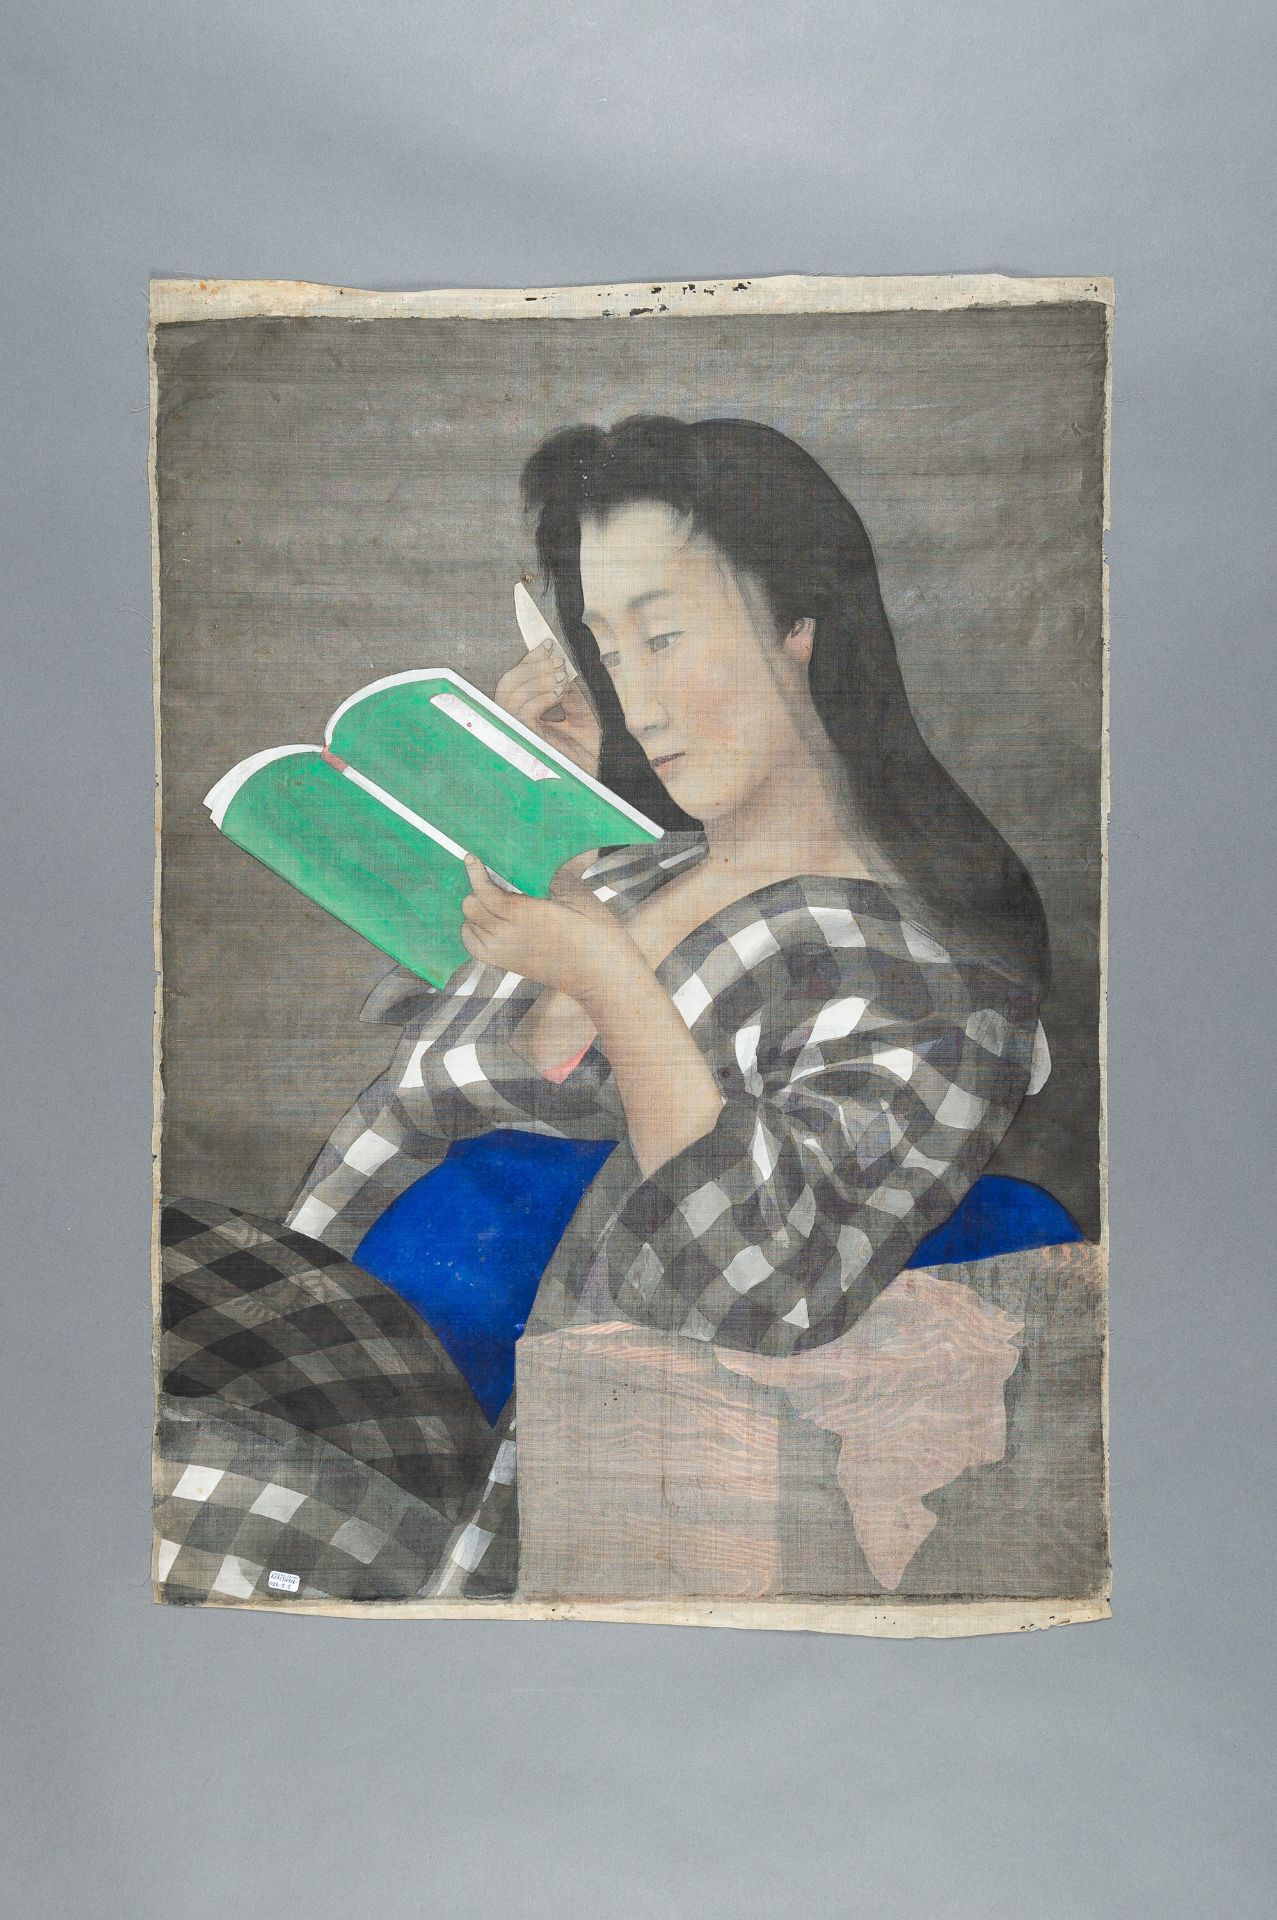 A PORTRAIT OF A LADY READING A BOOK, 1920s - Image 8 of 8